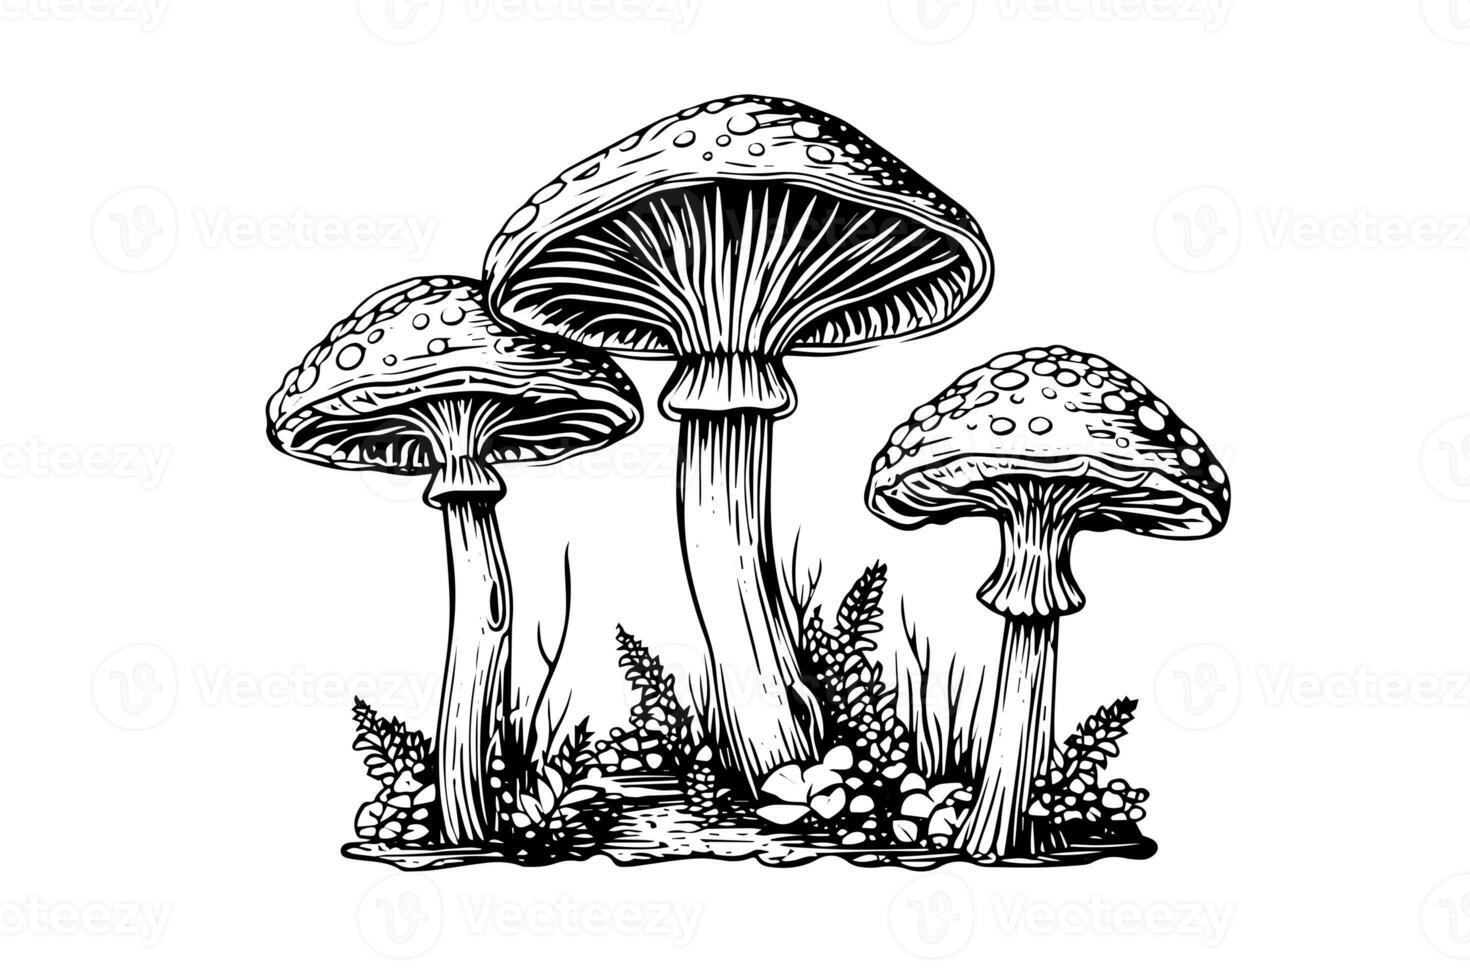 Fly agaric or amanita mushrooms group growing in grass engraving style. Vector illustration. photo